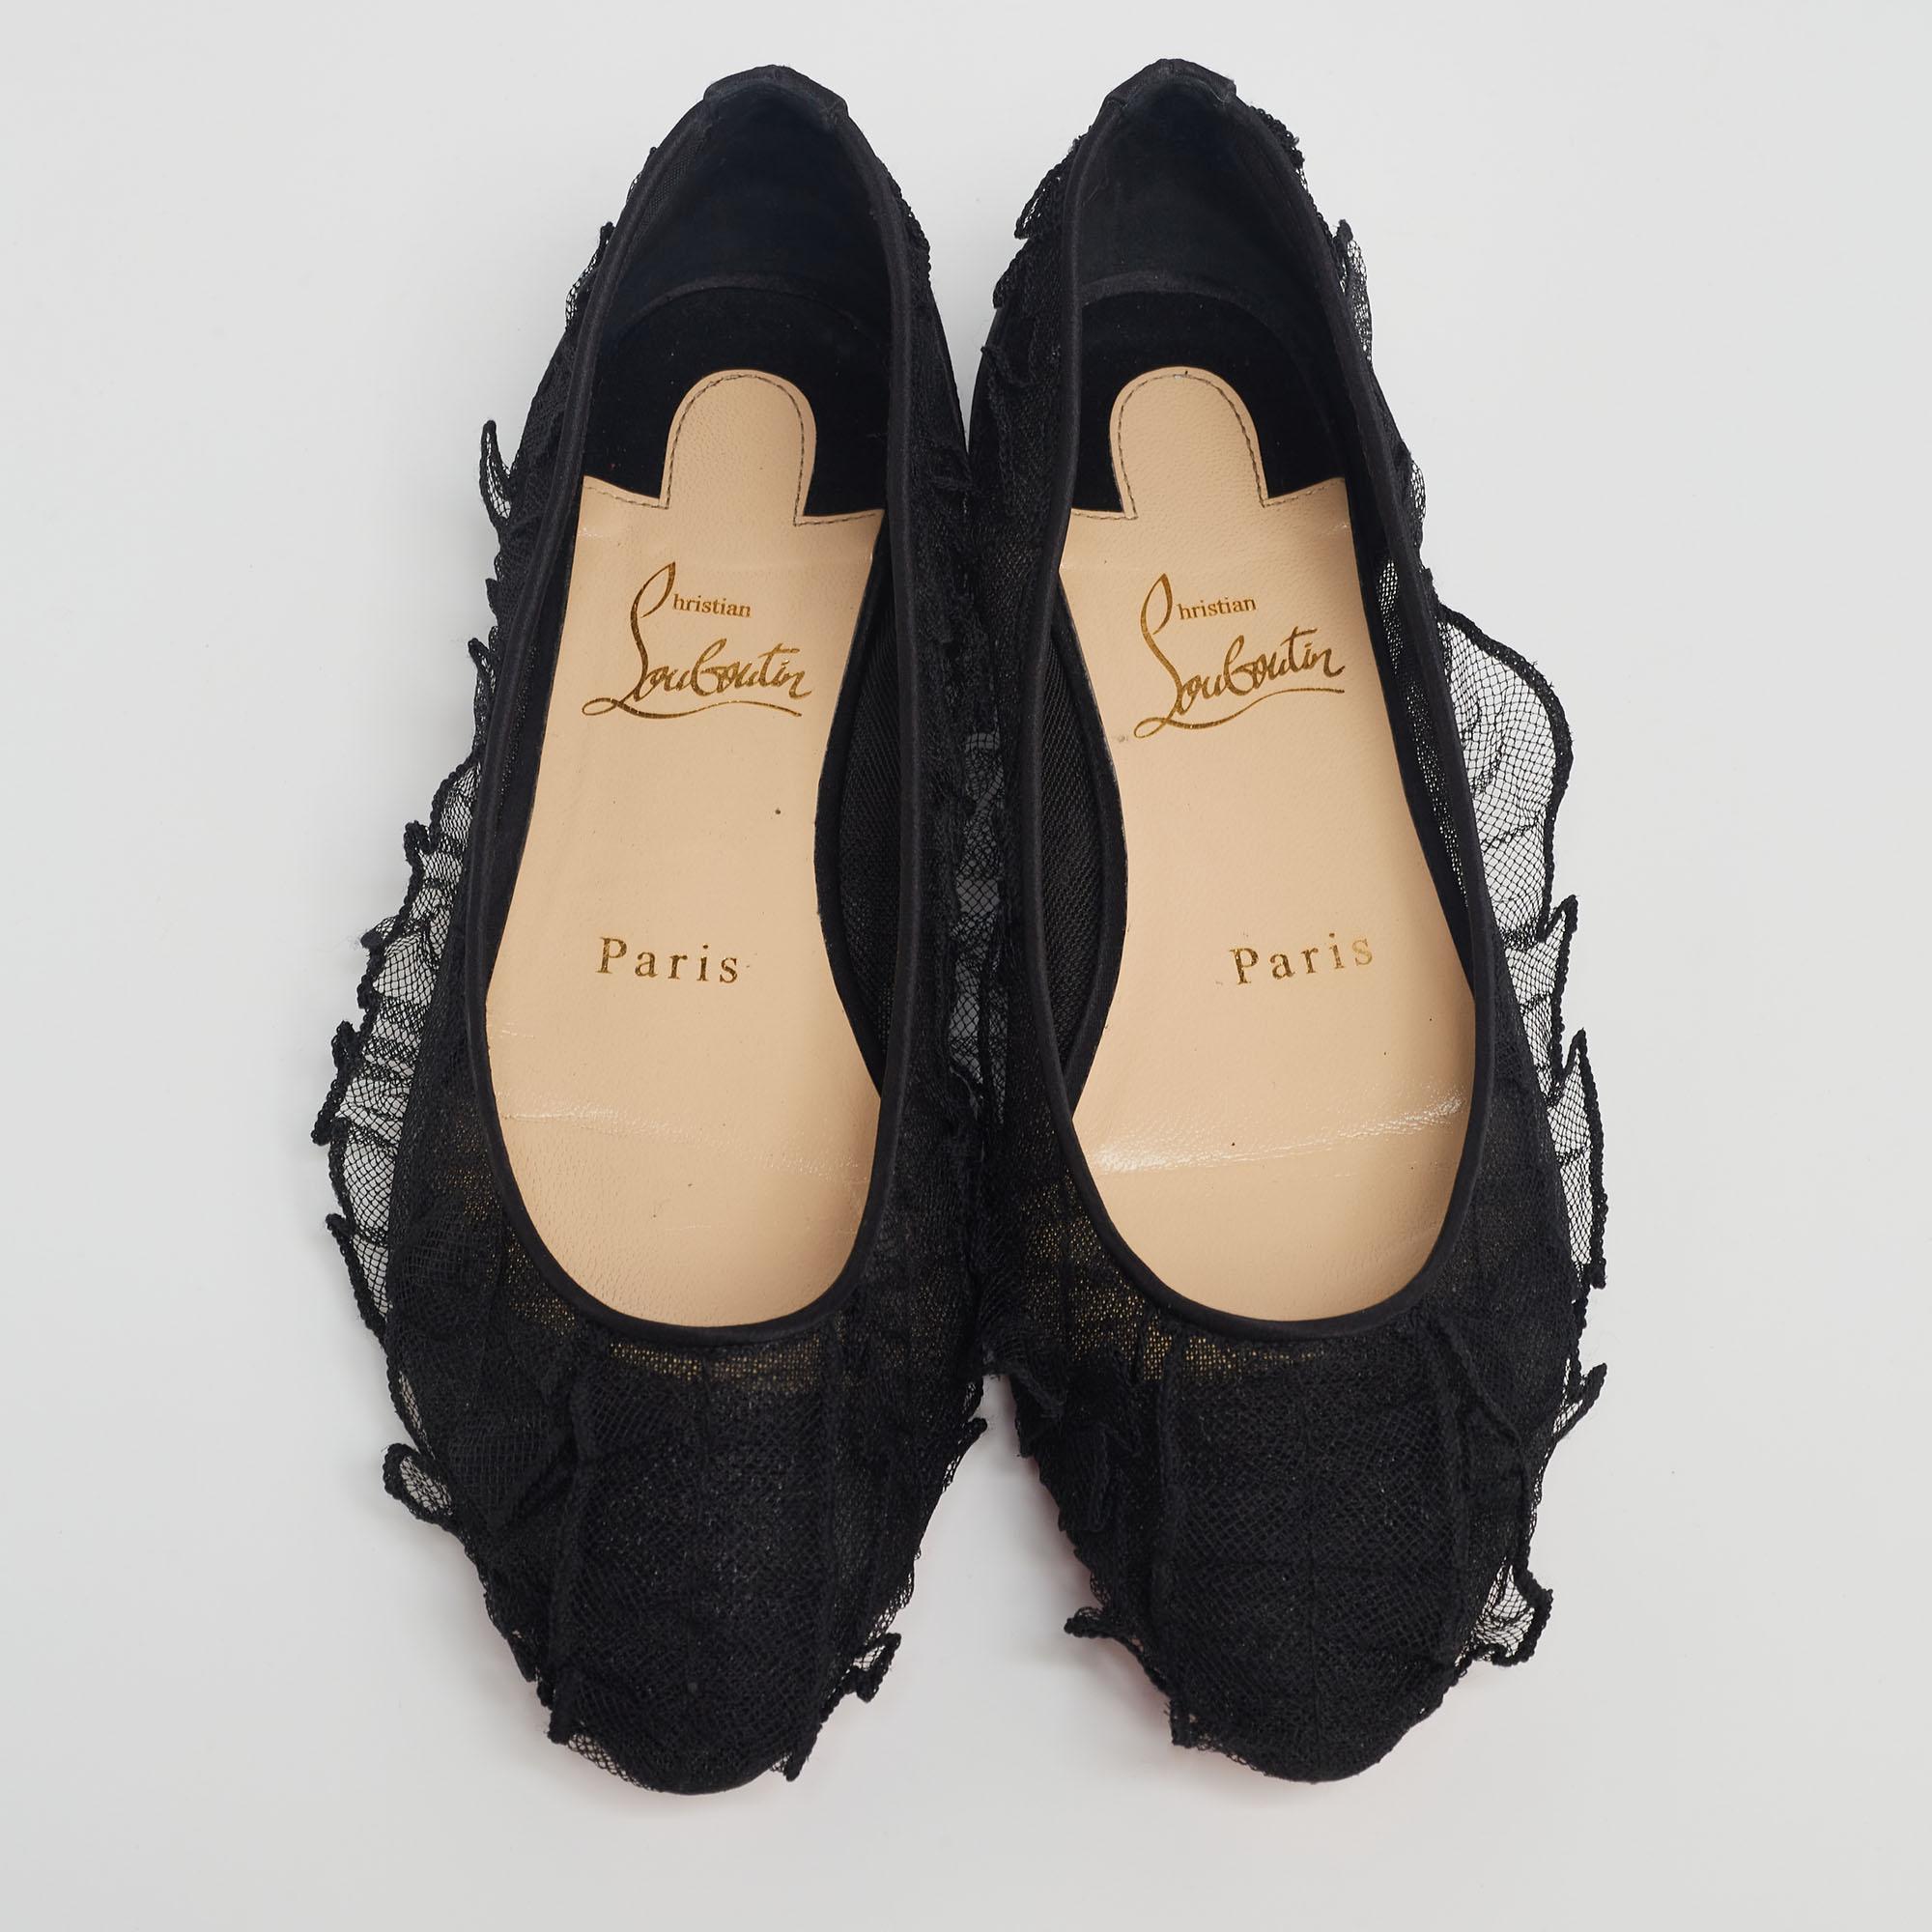 Look chic and elegant with this pair of ballet flats from the house of Christian Louboutin. Crafted from premium lace in a black shade, this pair of flats features a slip-on design, closed-toe, and frill details to impart a dainty look.

Includes: